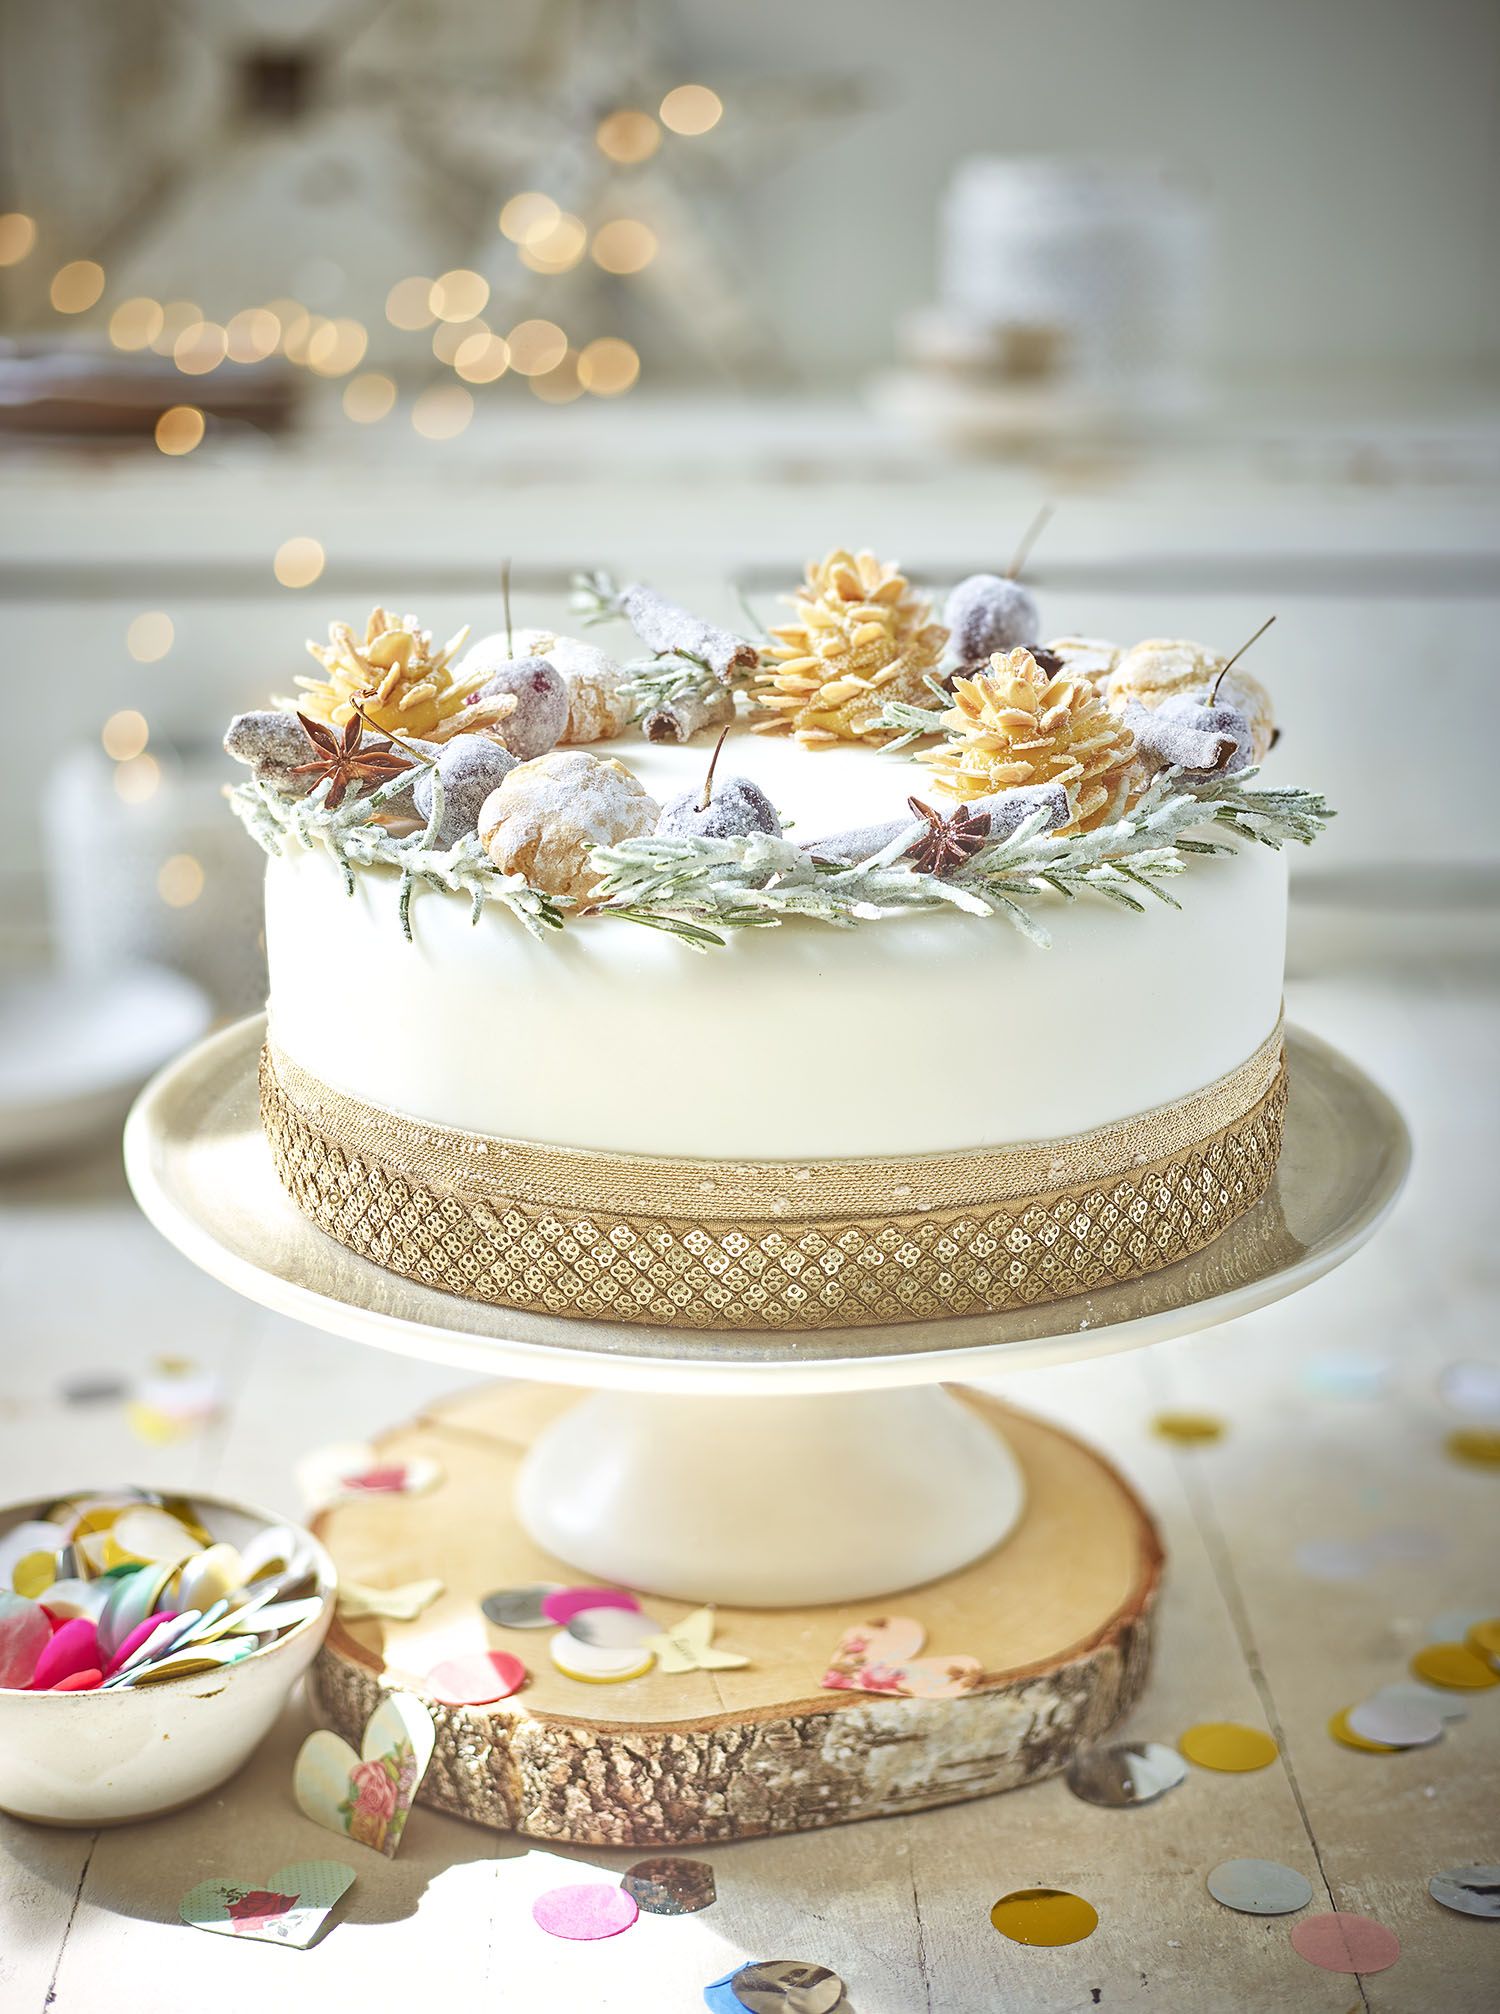 Cute decorations for a christmas cake to make your cake look festive